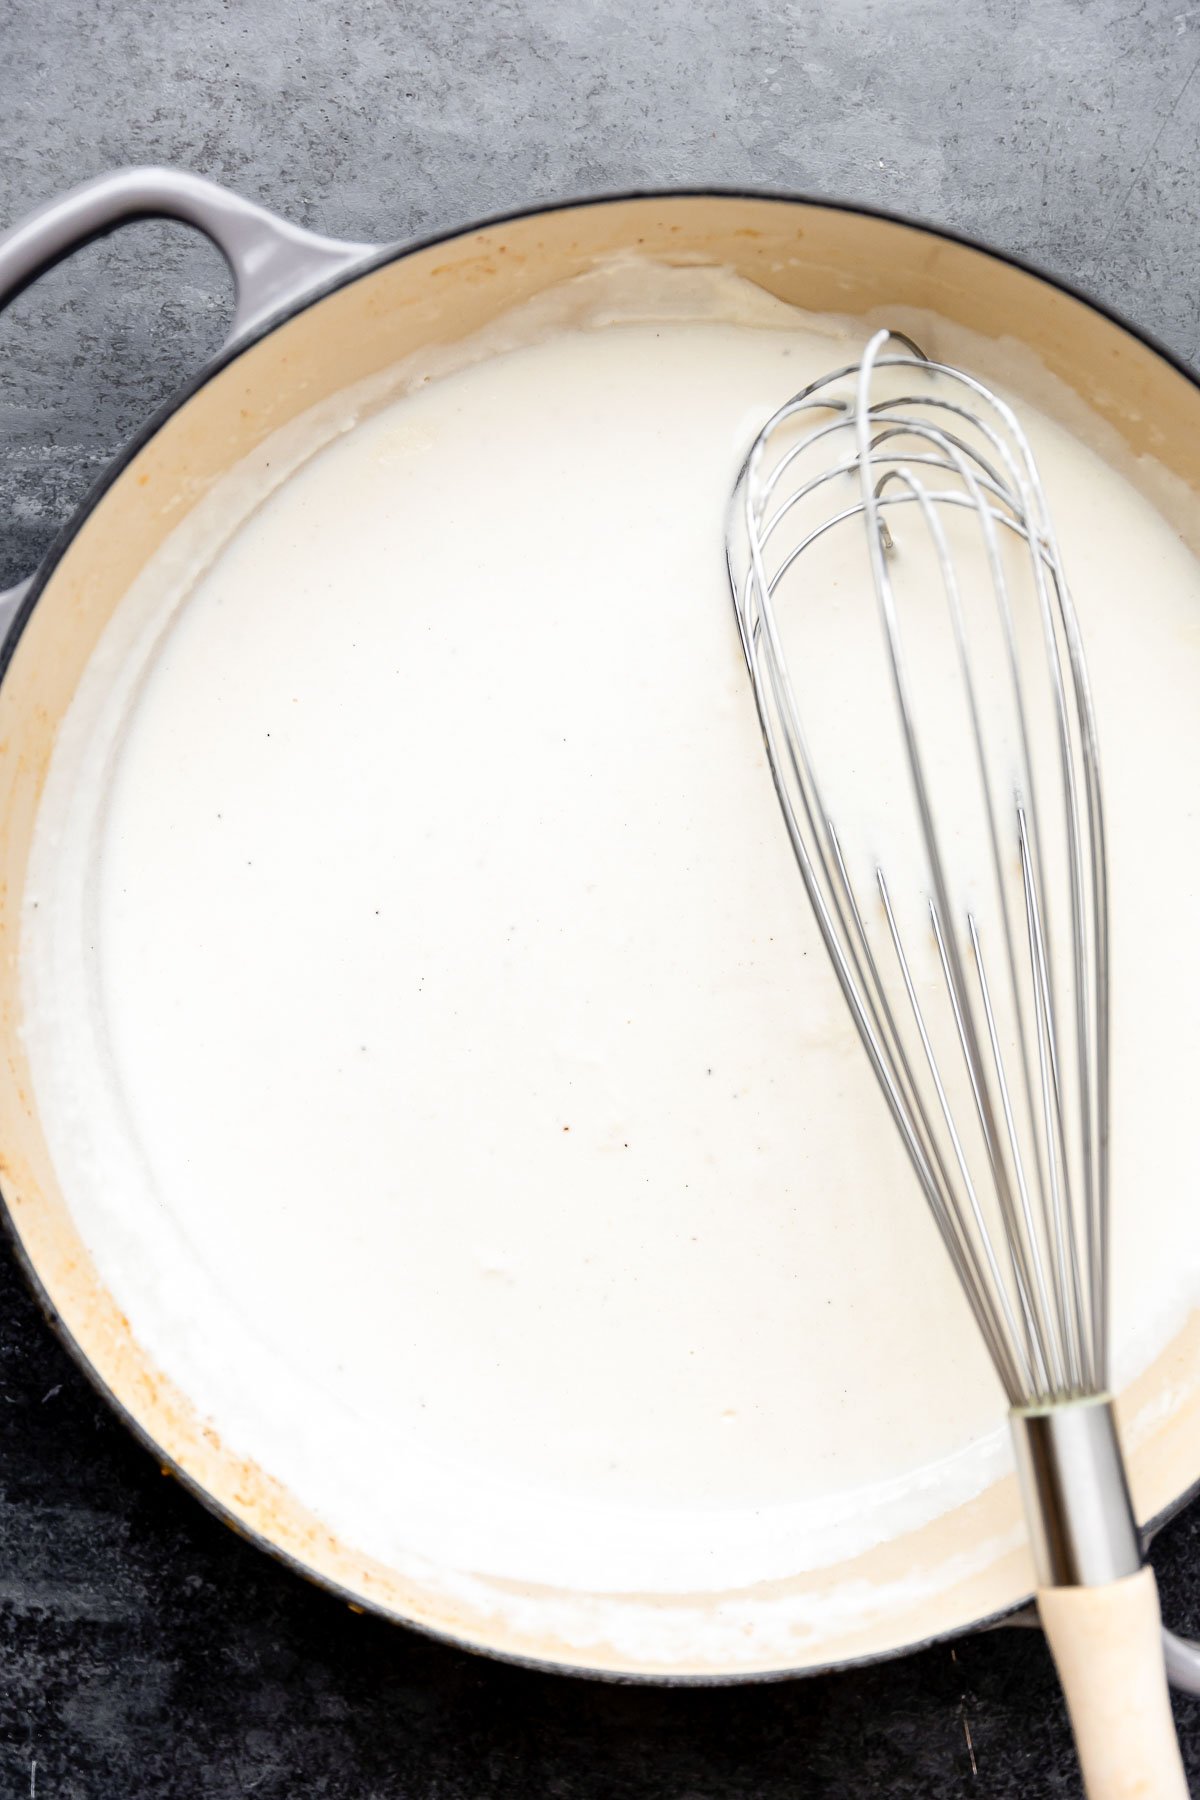 Seafood béchamel sauce for seafood stuffed shells fills a large gray skillet that sits atop a dark gray textured surface. A metal whisk rests atop the skillet for mixing.